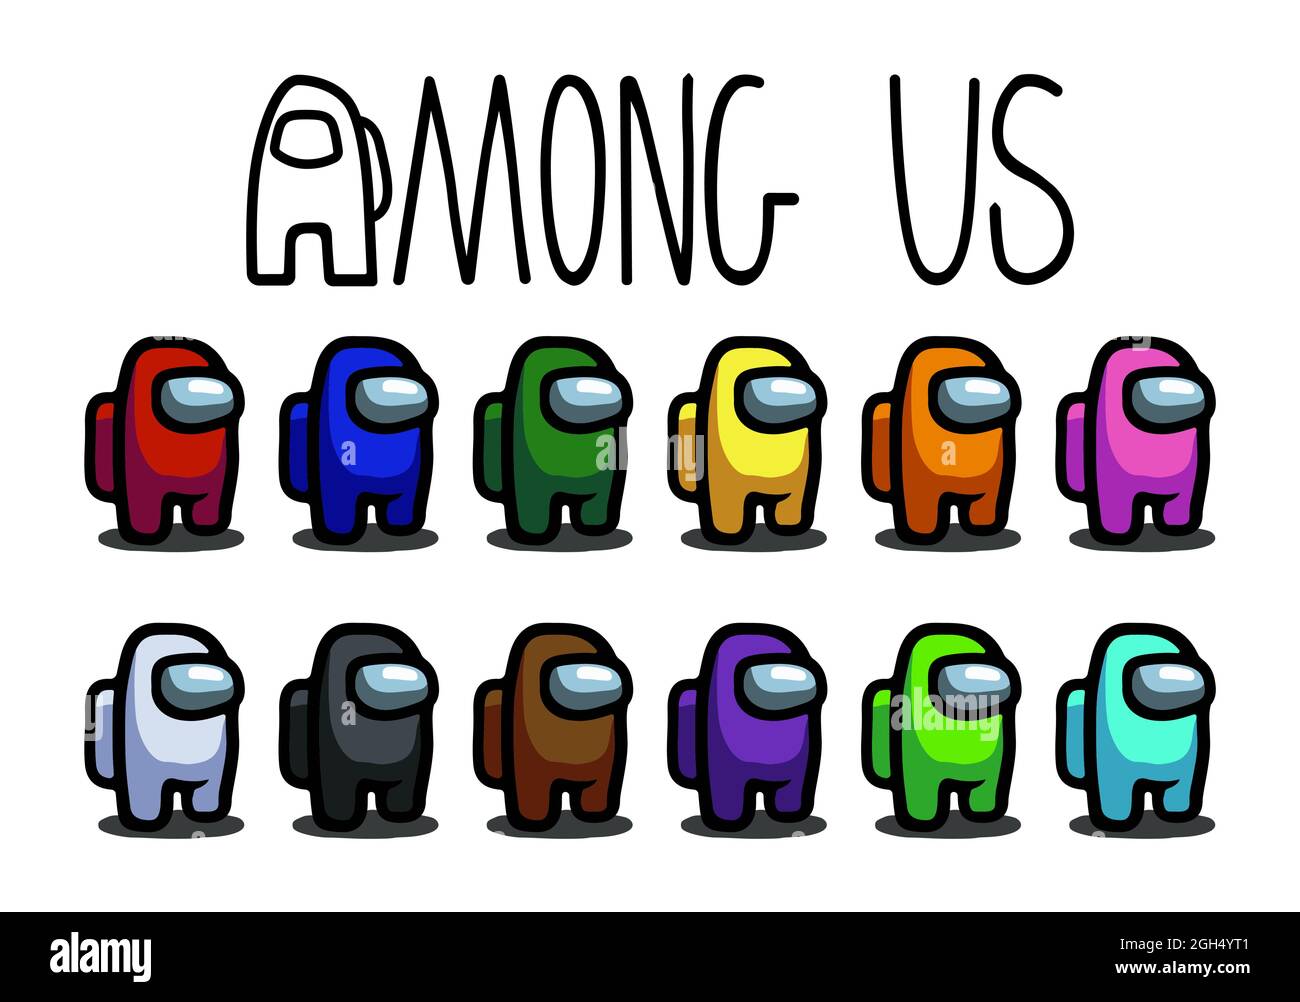 Among us png images